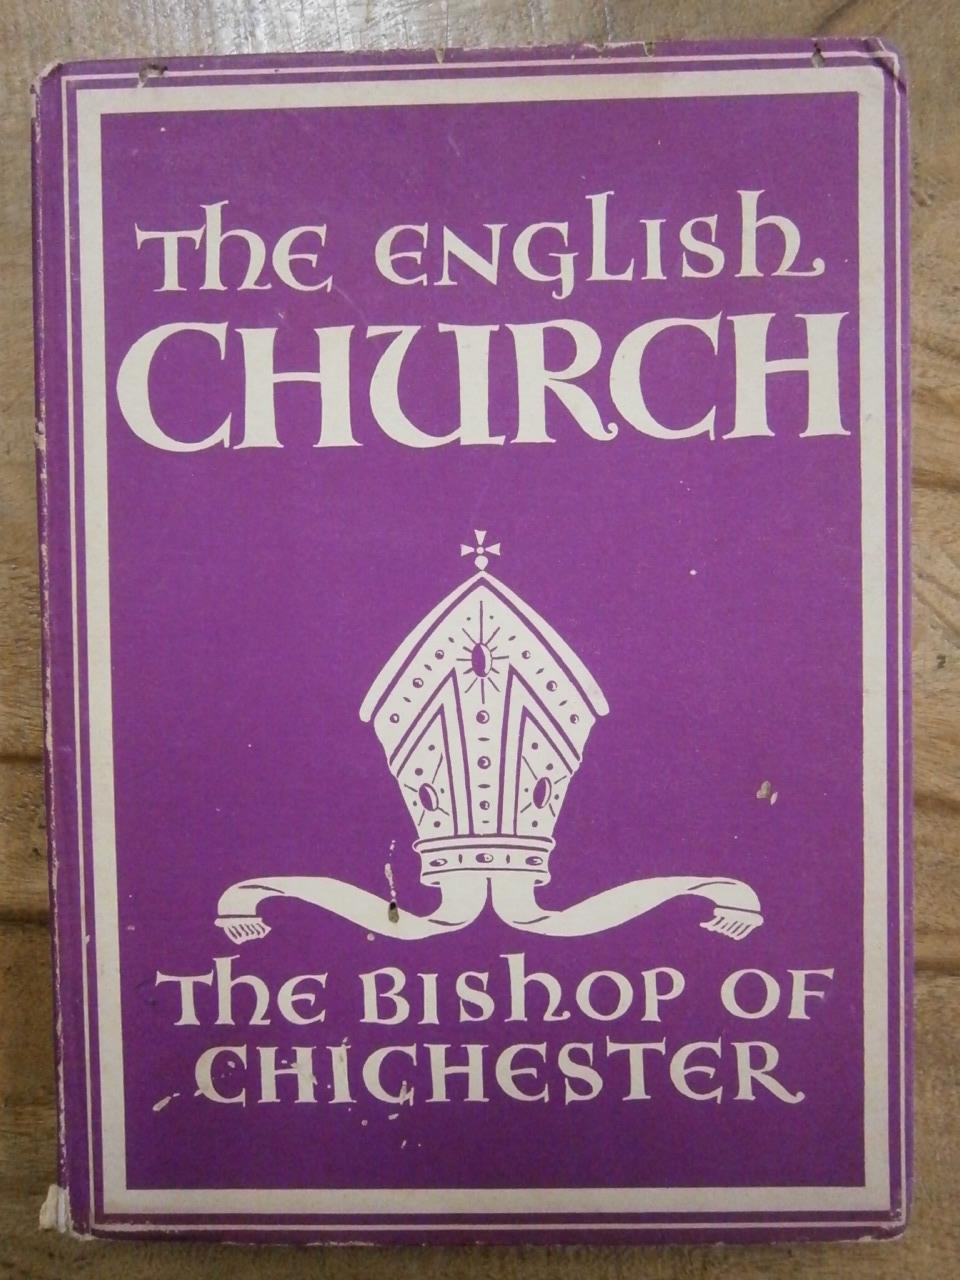 the-english-church-by-bell-g-k-a-bishop-of-chichester-good-hardcover-1942-1st-edition